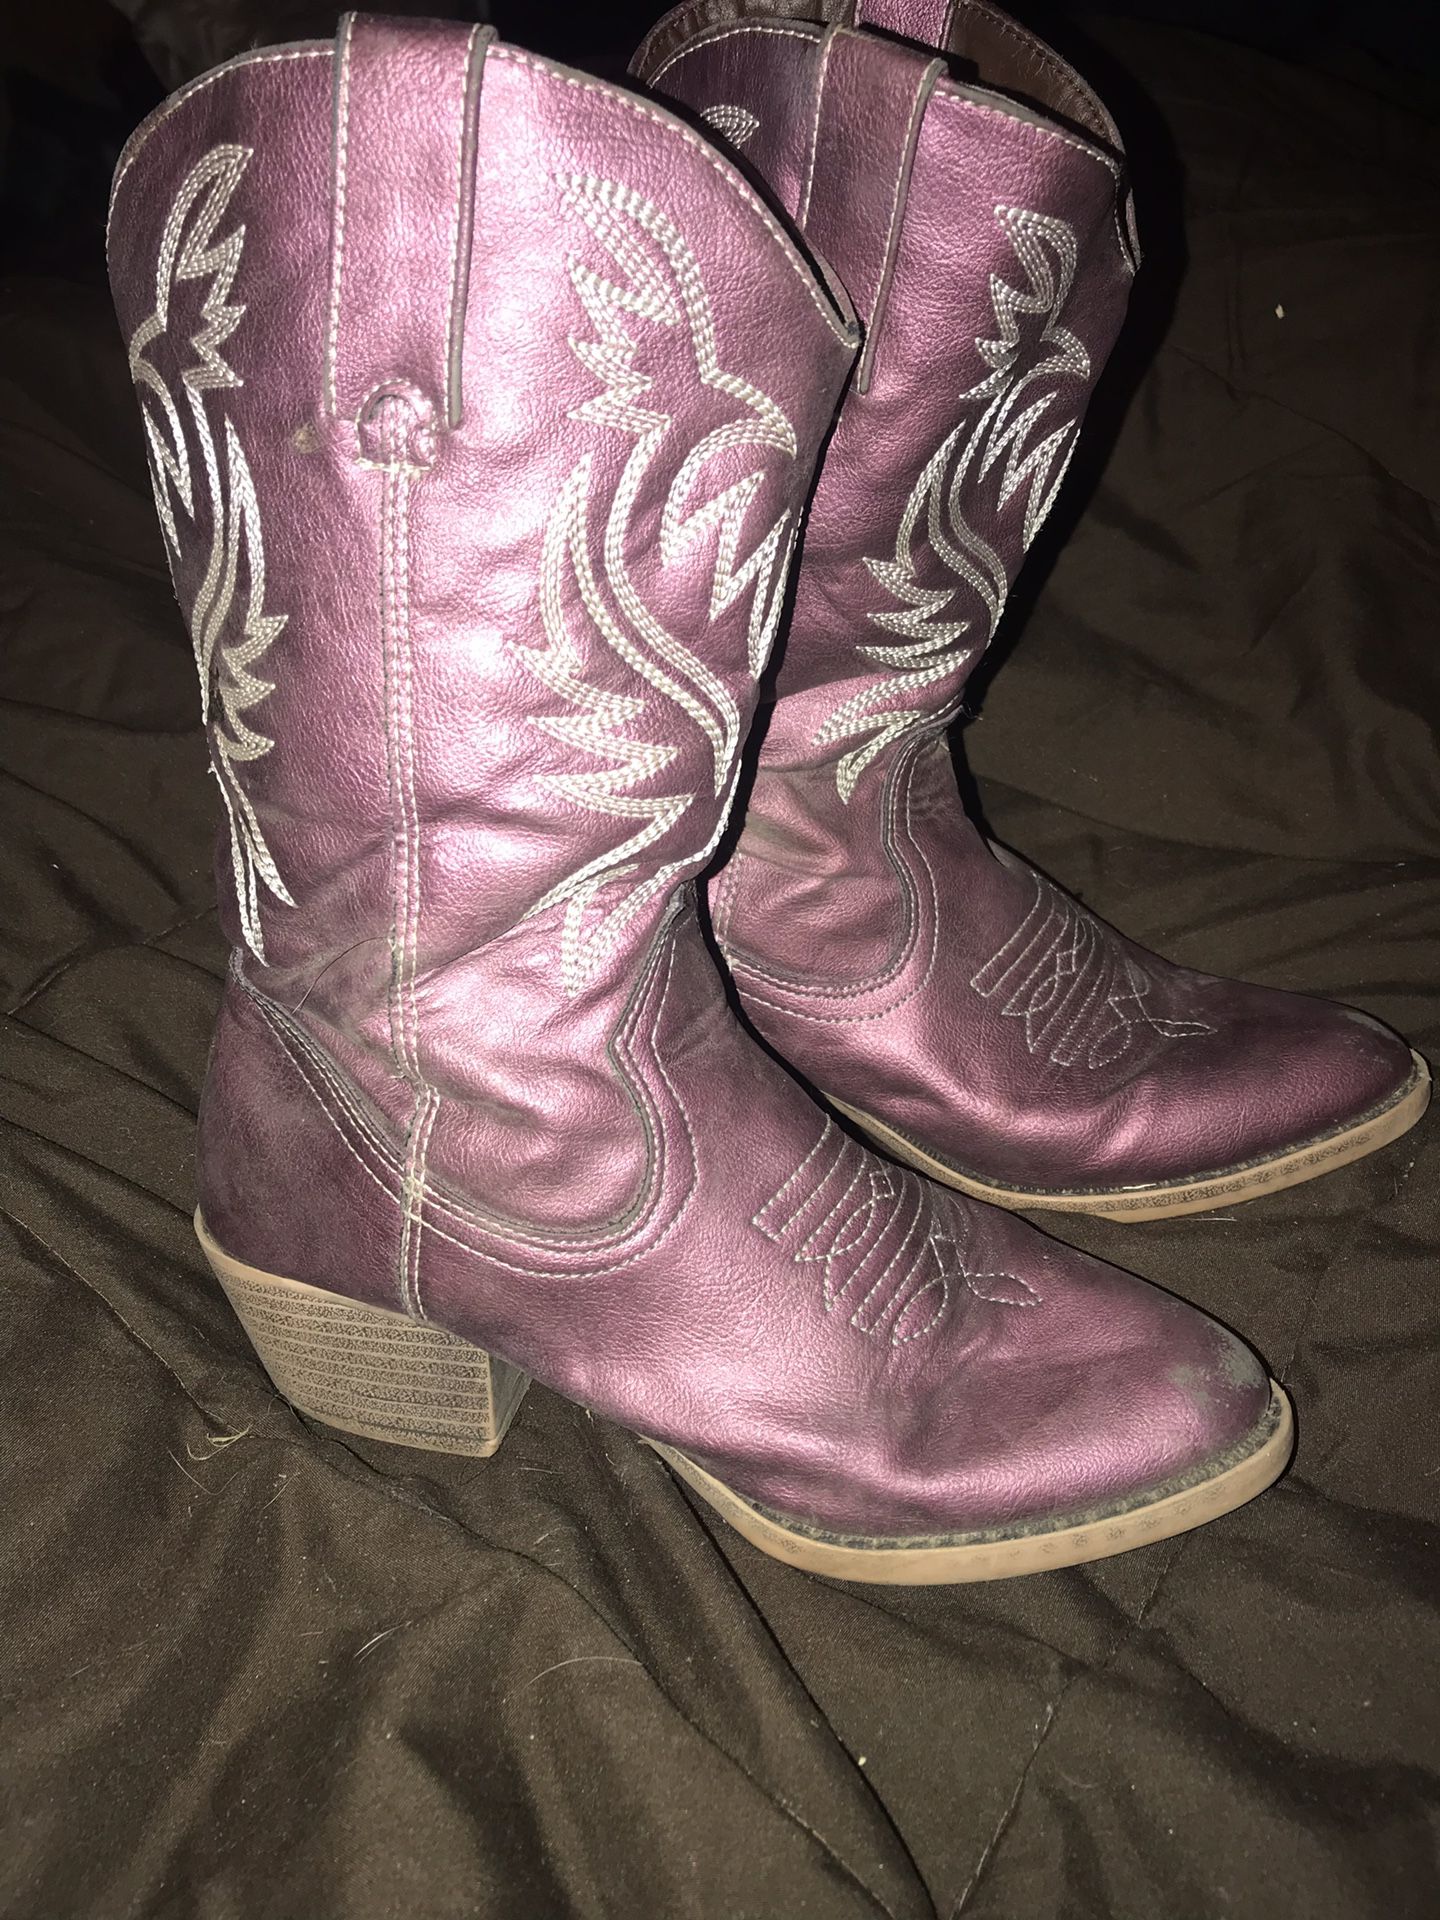 Girls youth size 3 cowgirl boots